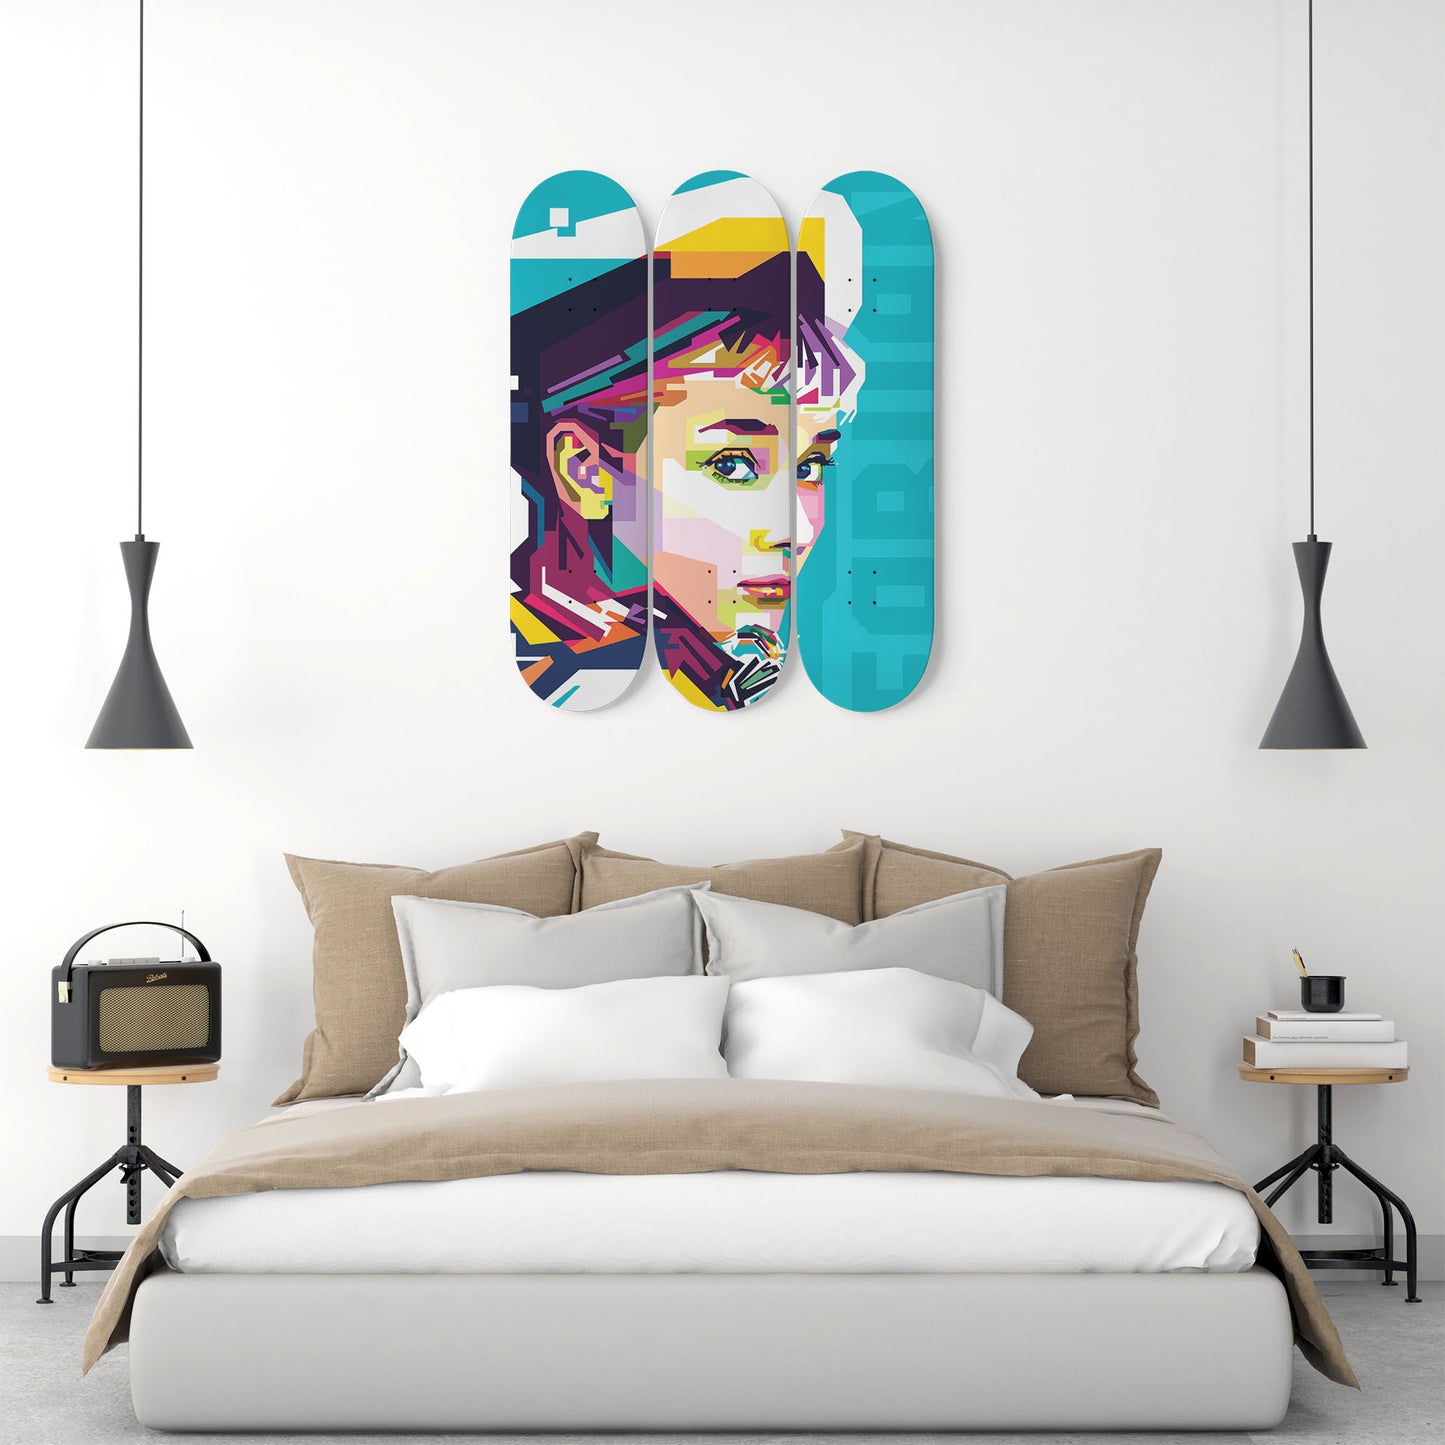 Audrey Hepburn Artwork 4 | 3-piece Skateboard Wall Art | Made with Maple Wood | Wall Hanging Decoration | Best Unique Gift for Home Decor